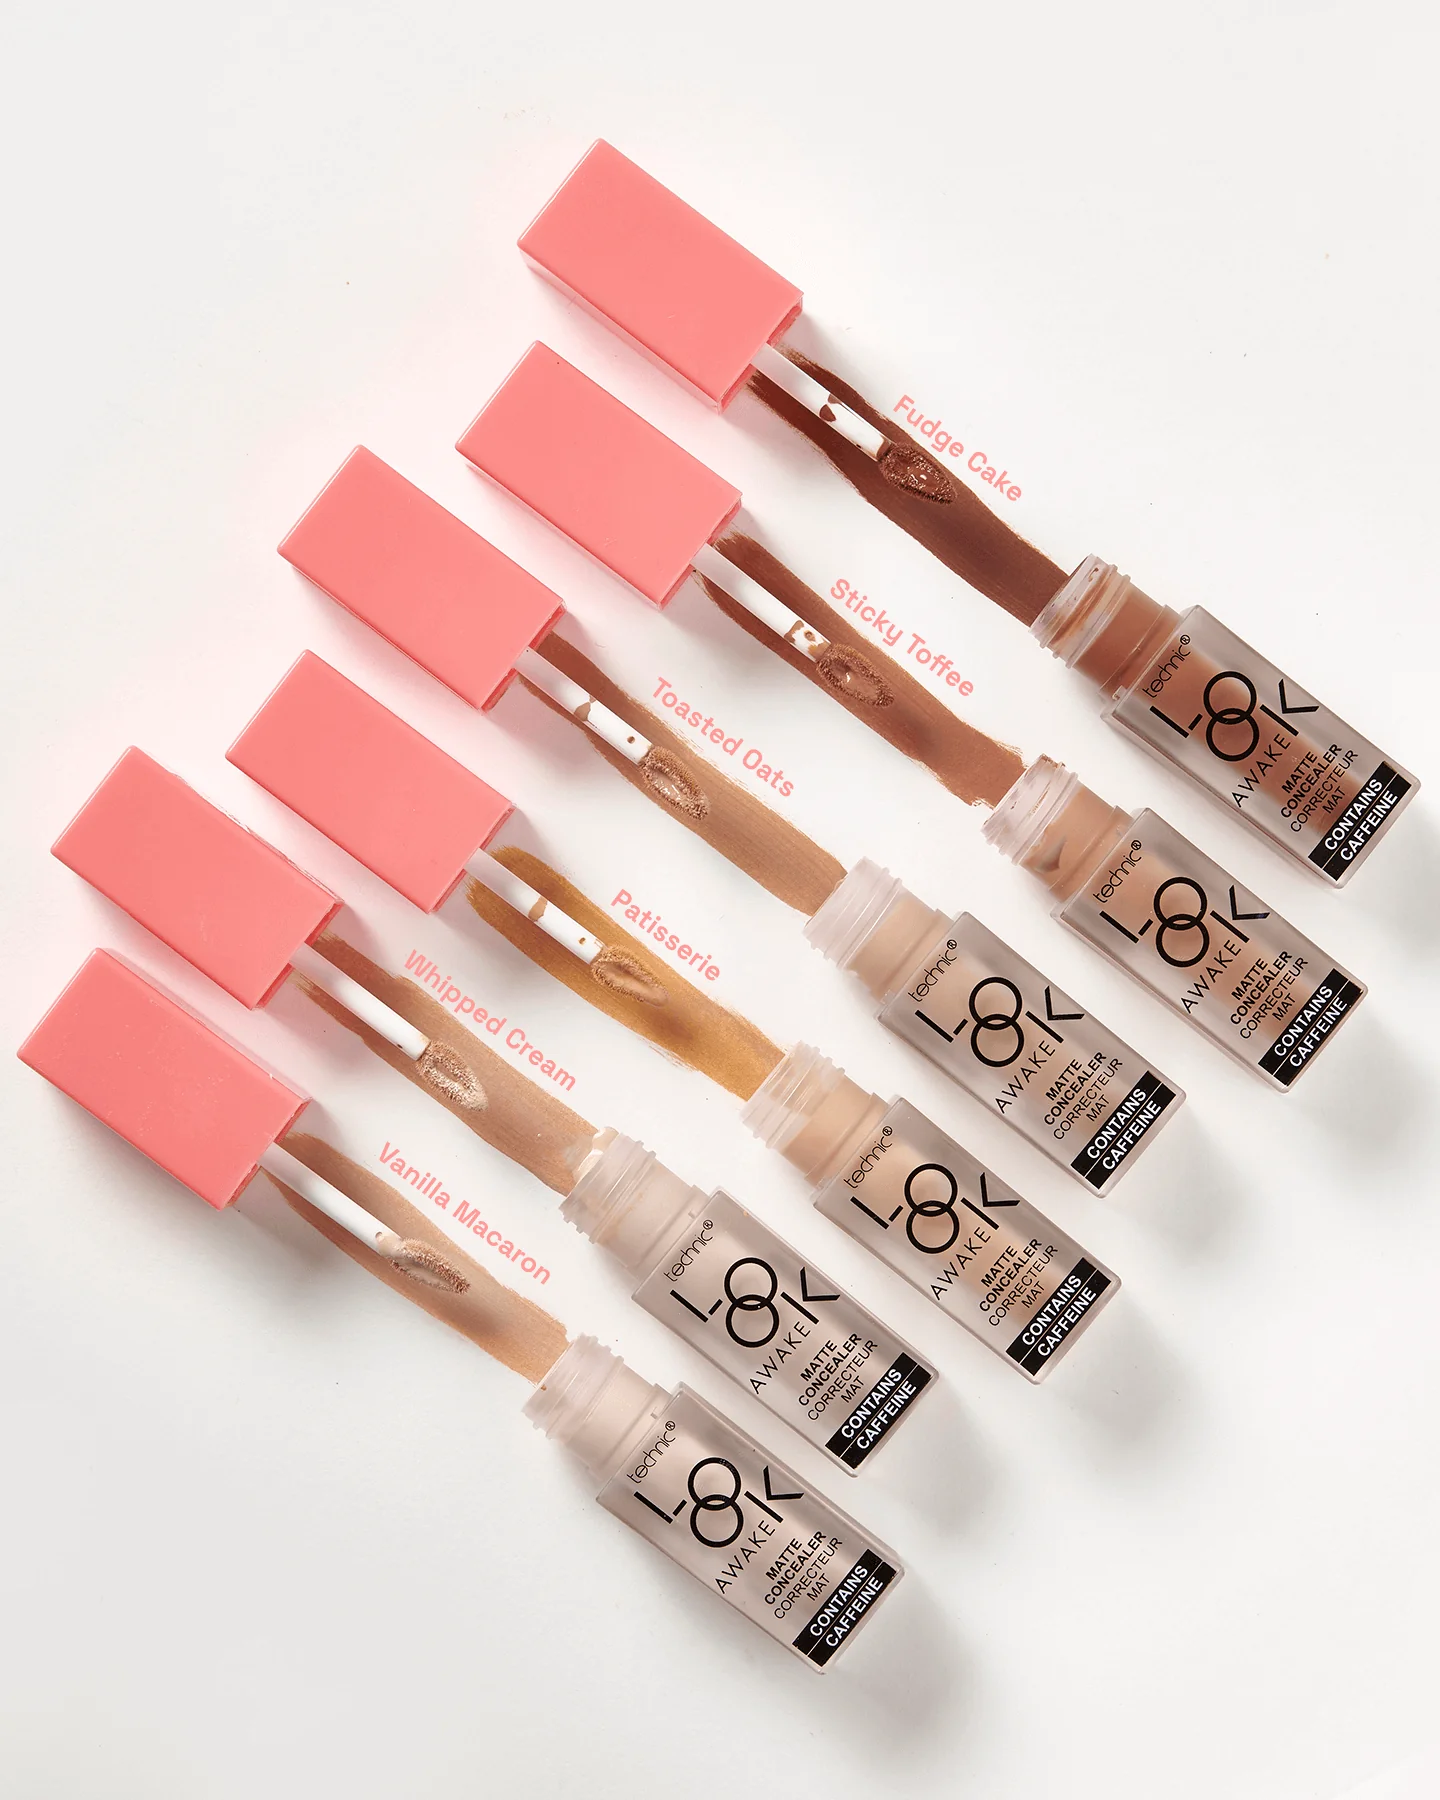 Technic Look Awake Matte Concealer - Sticky Toffee